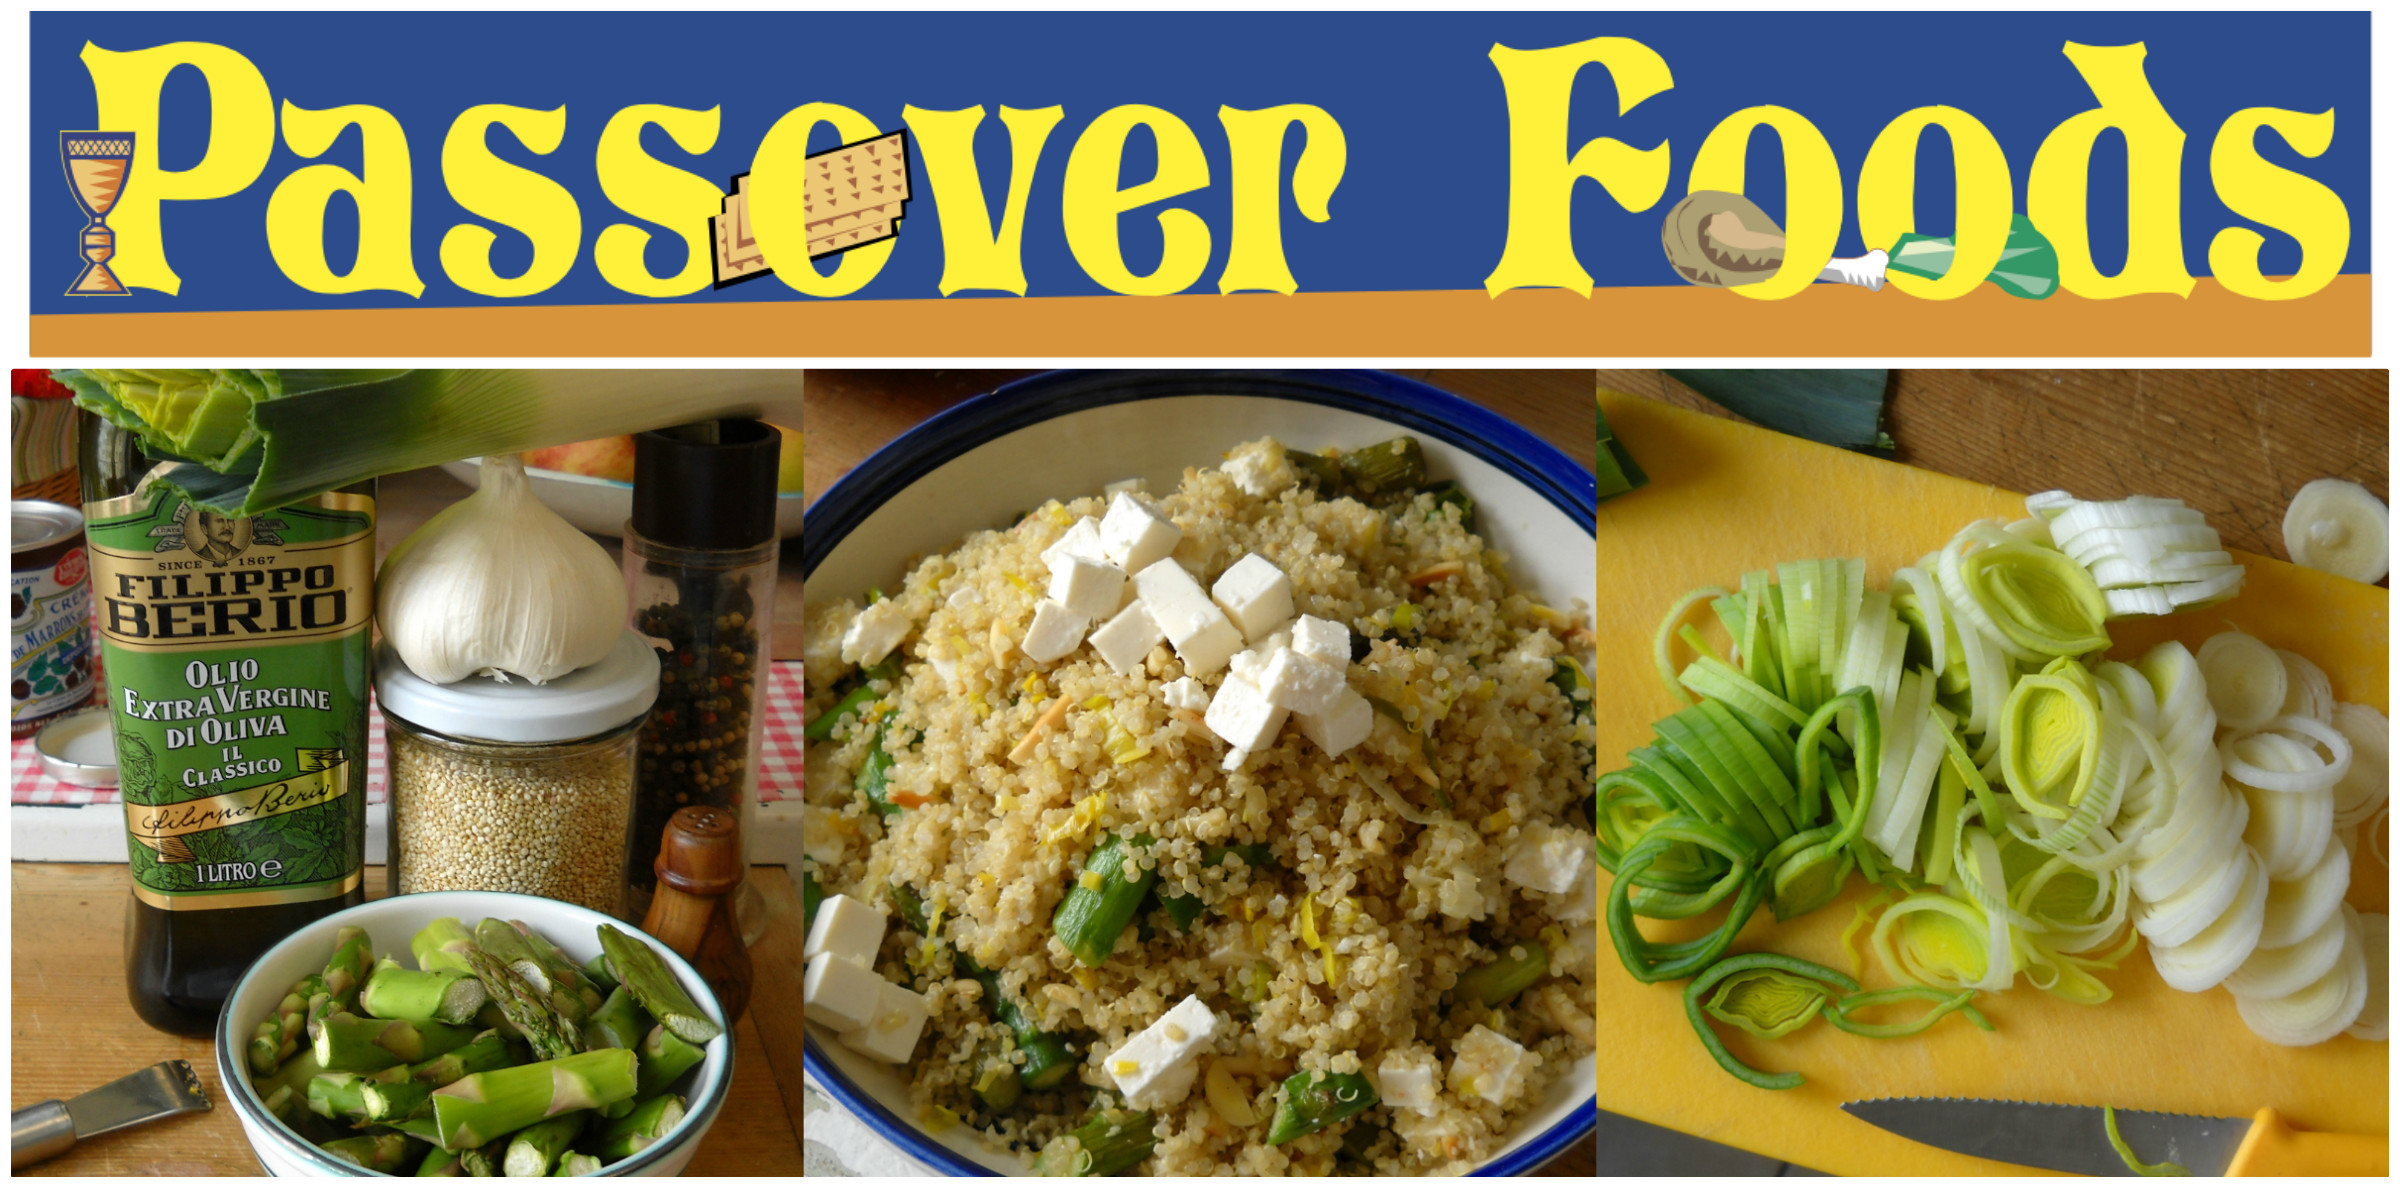 Passover Food Restriction
 The Best Passover Food Restriction – Home Family Style